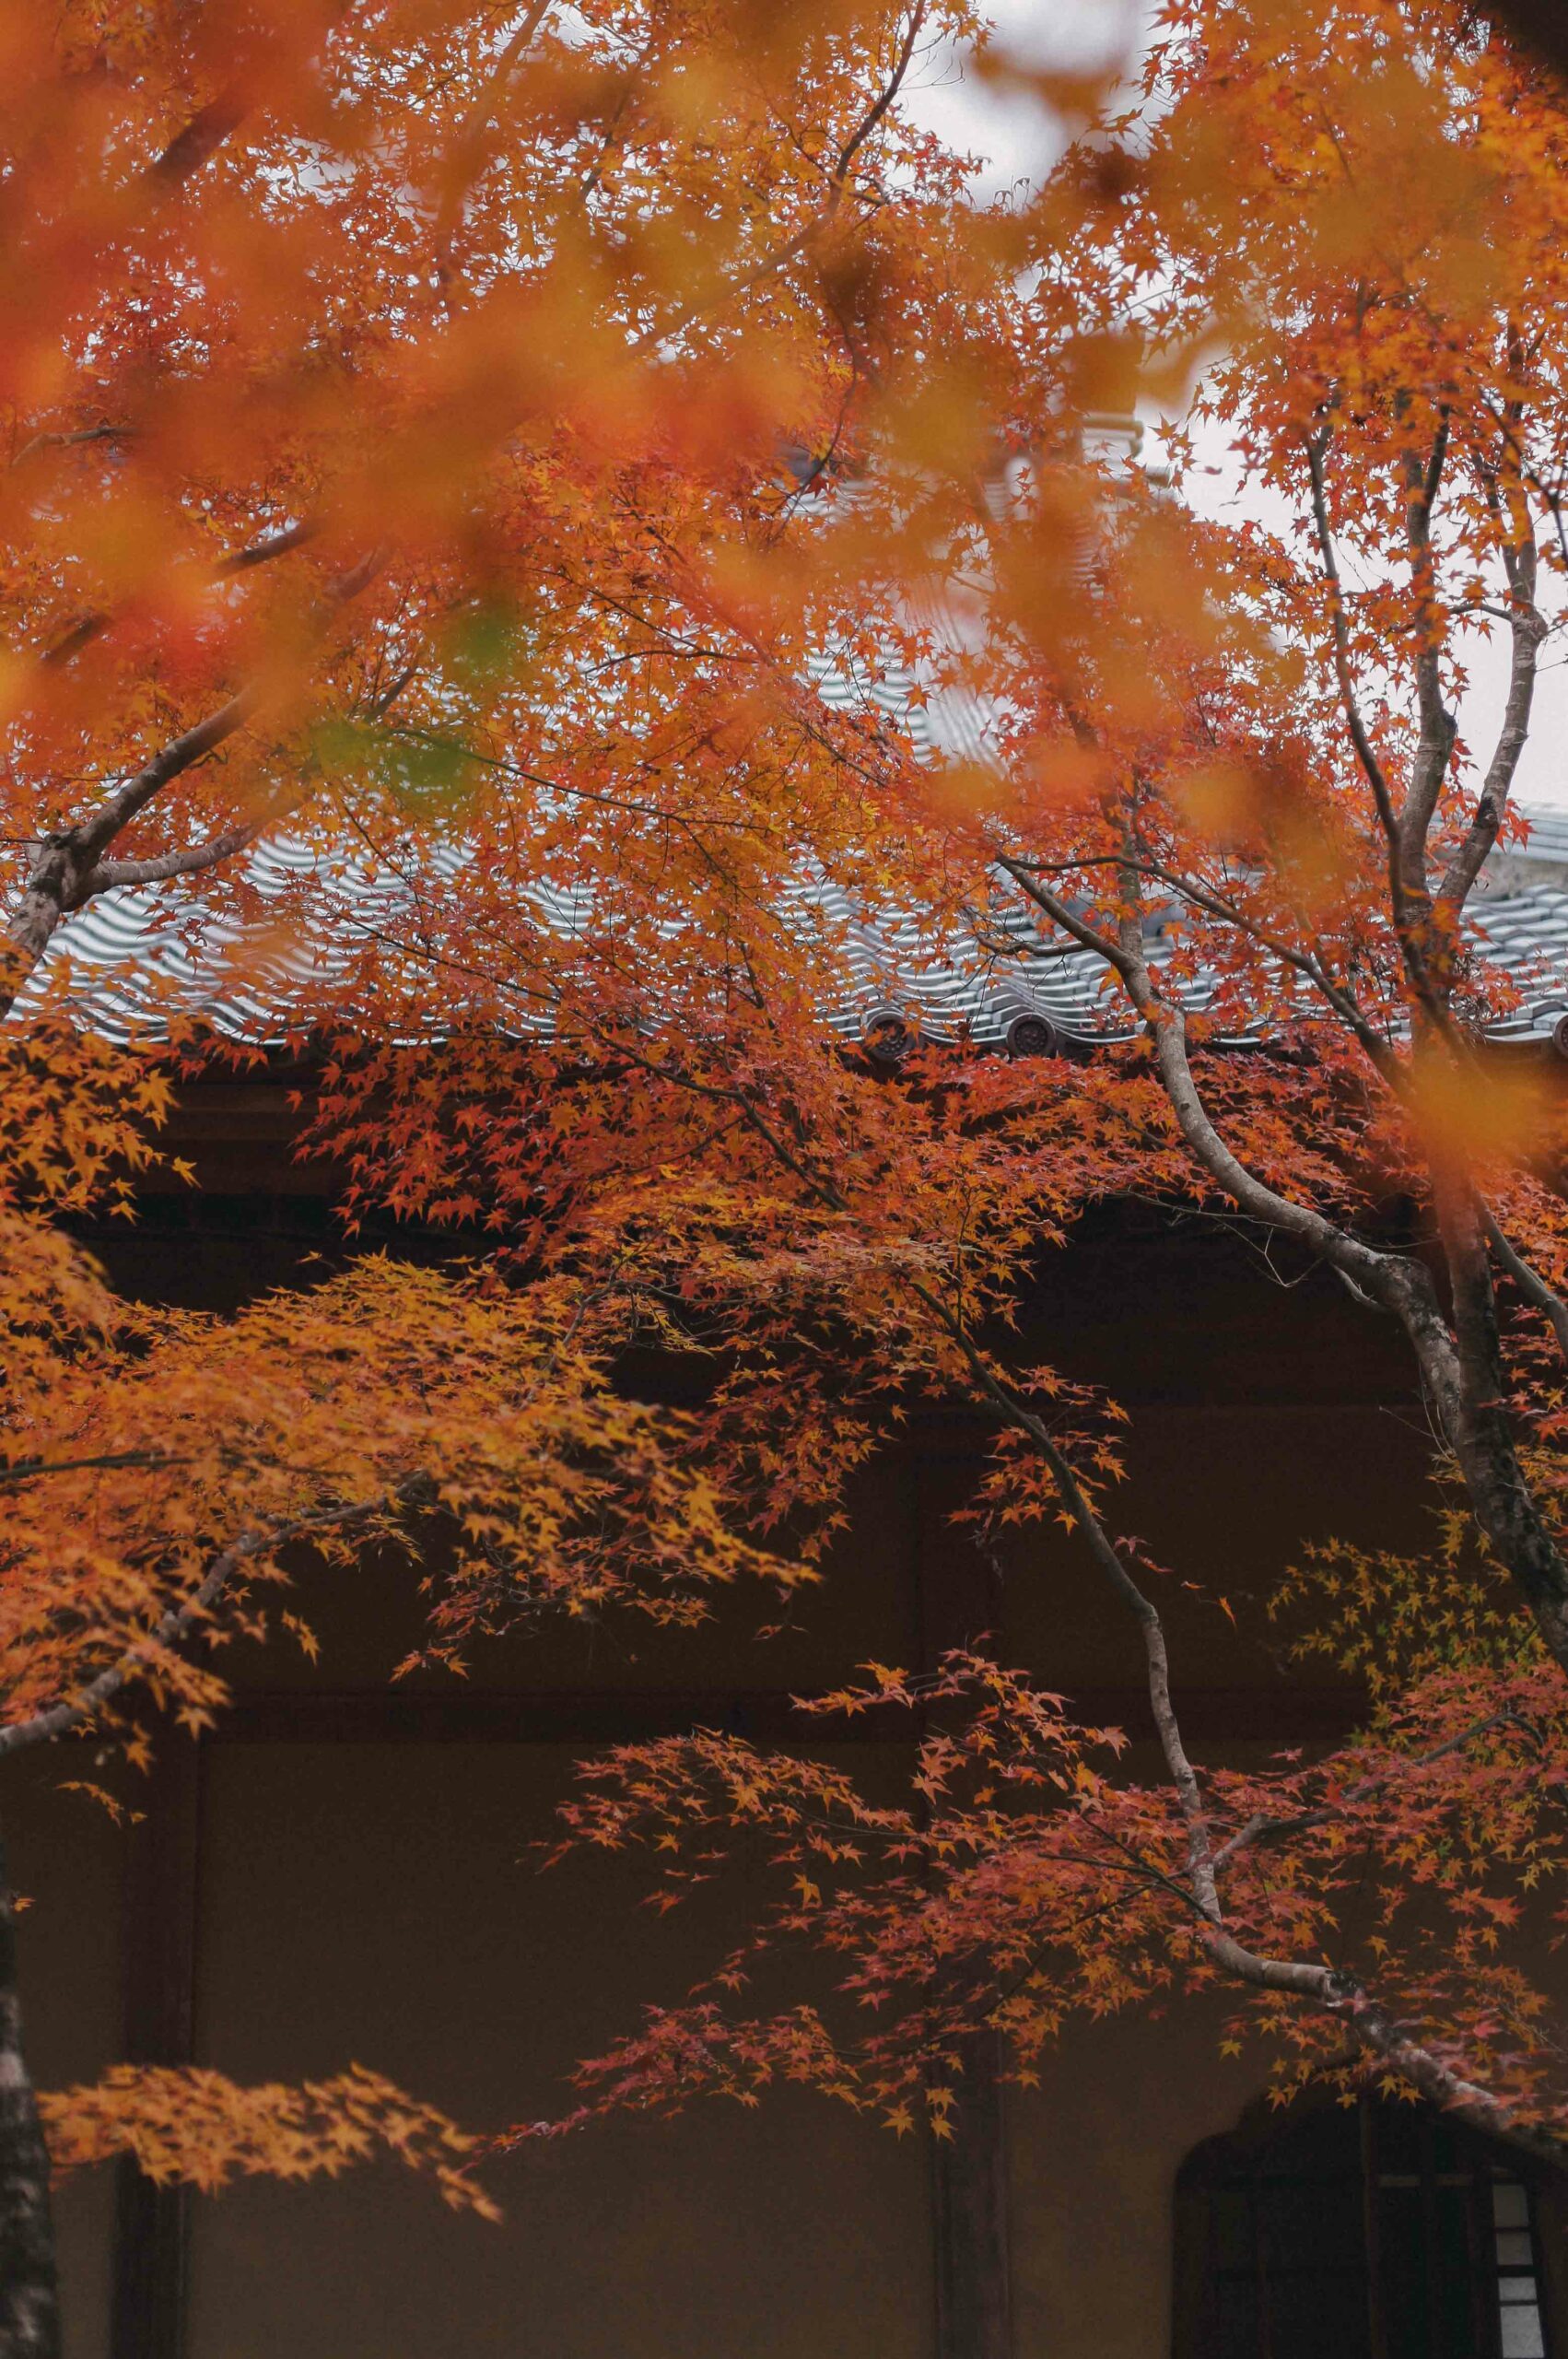 The temple's maples turn a deep red at the end of November, until the beginning of December.